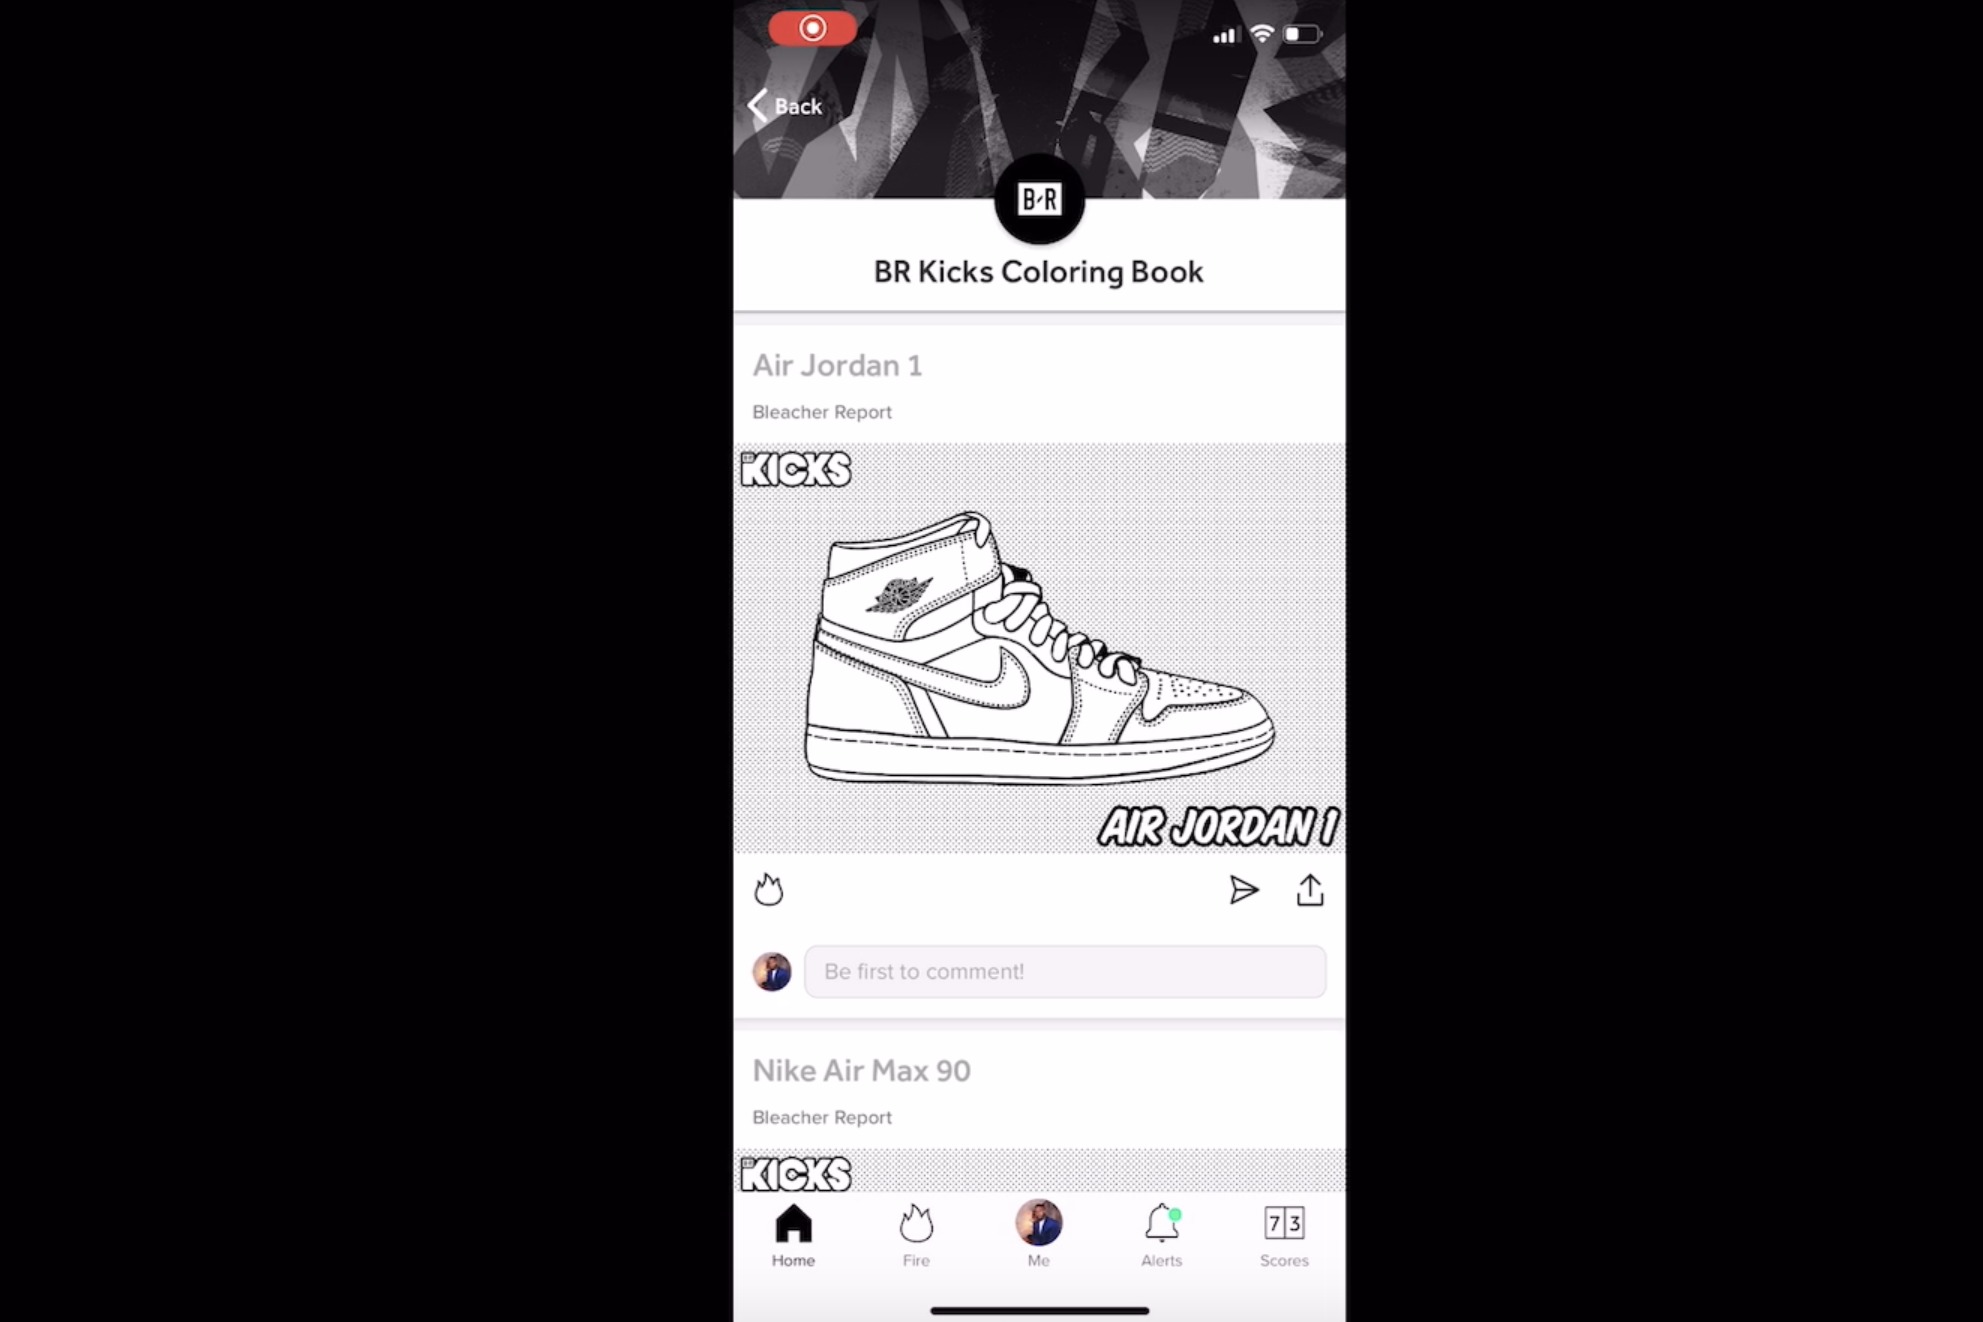 Download Br Kicks Coloring Book Bleacher Report Latest News Videos And Highlights